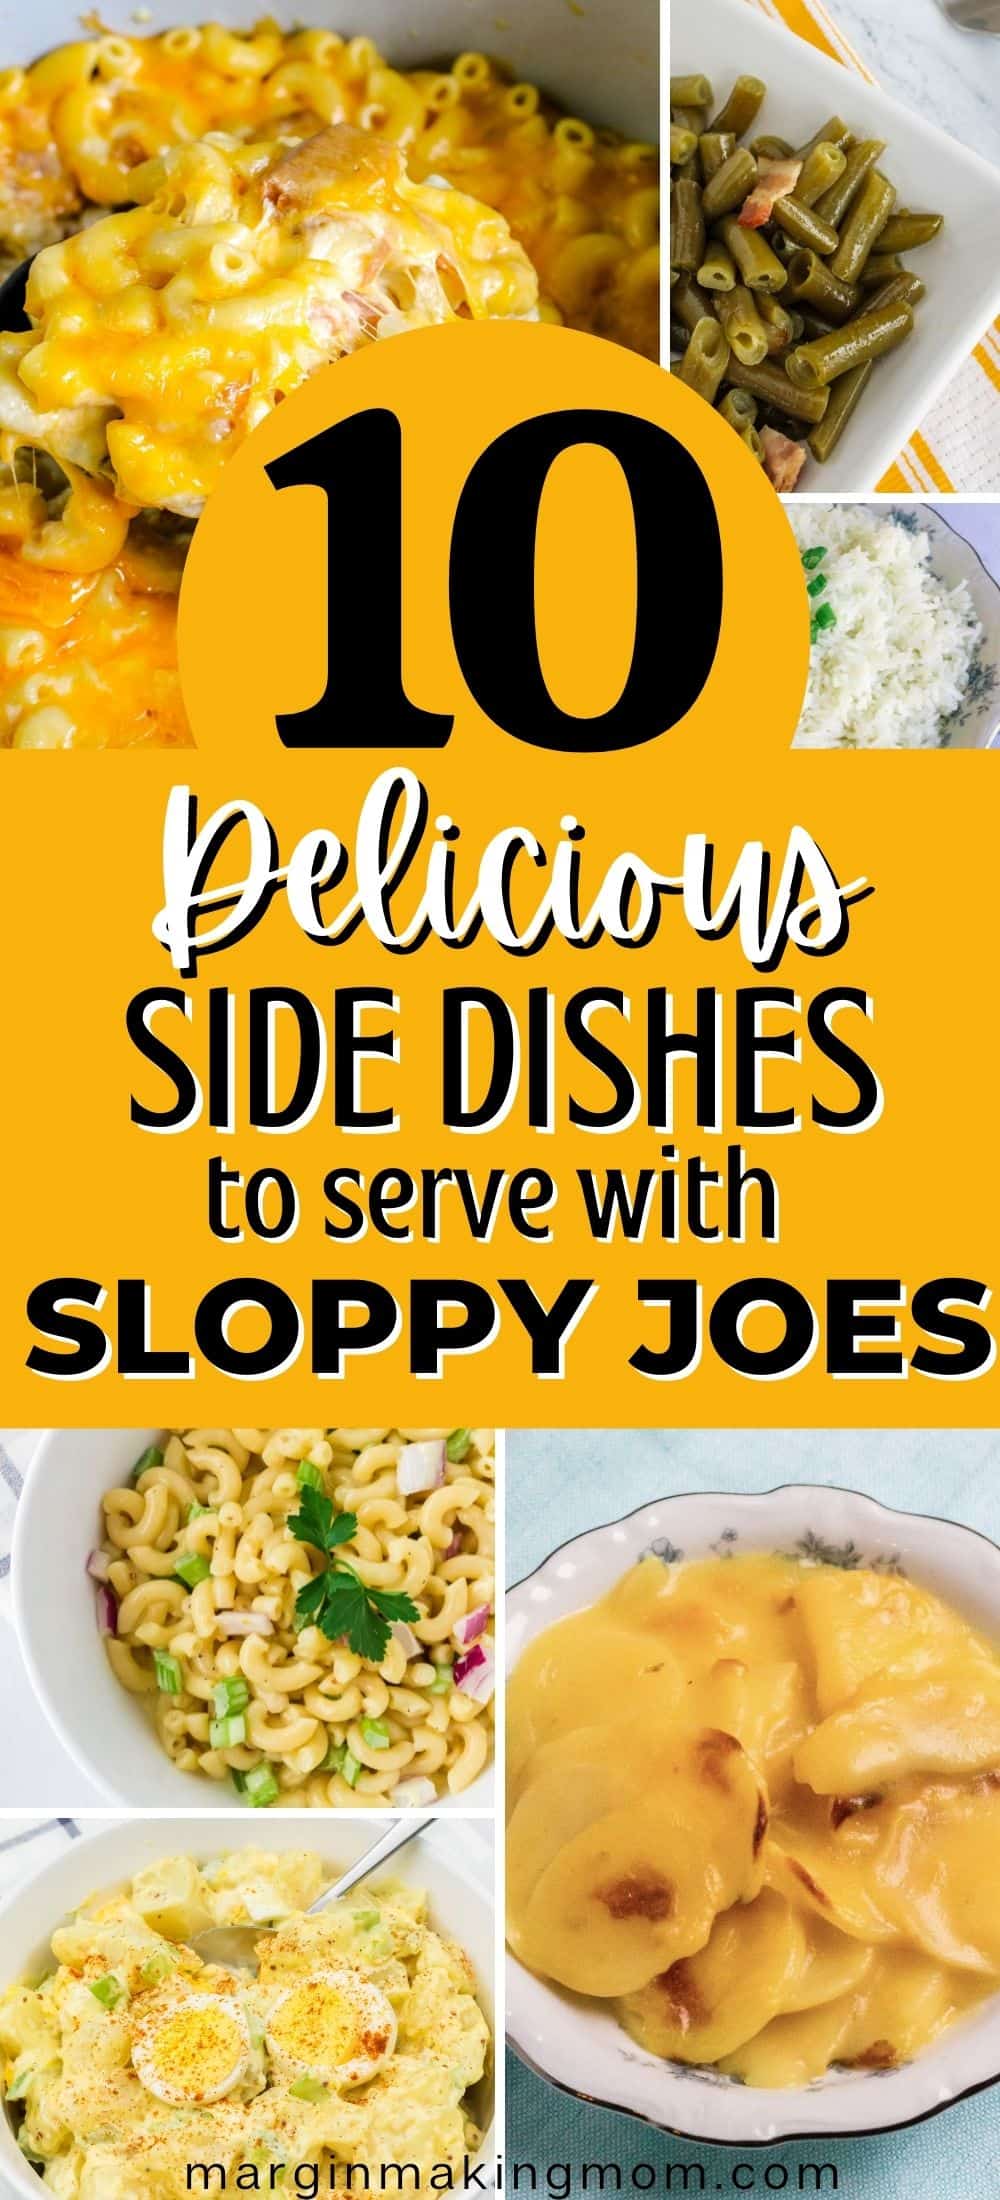 collage image featuring different photographs of side dishes to serve with sloppy joes